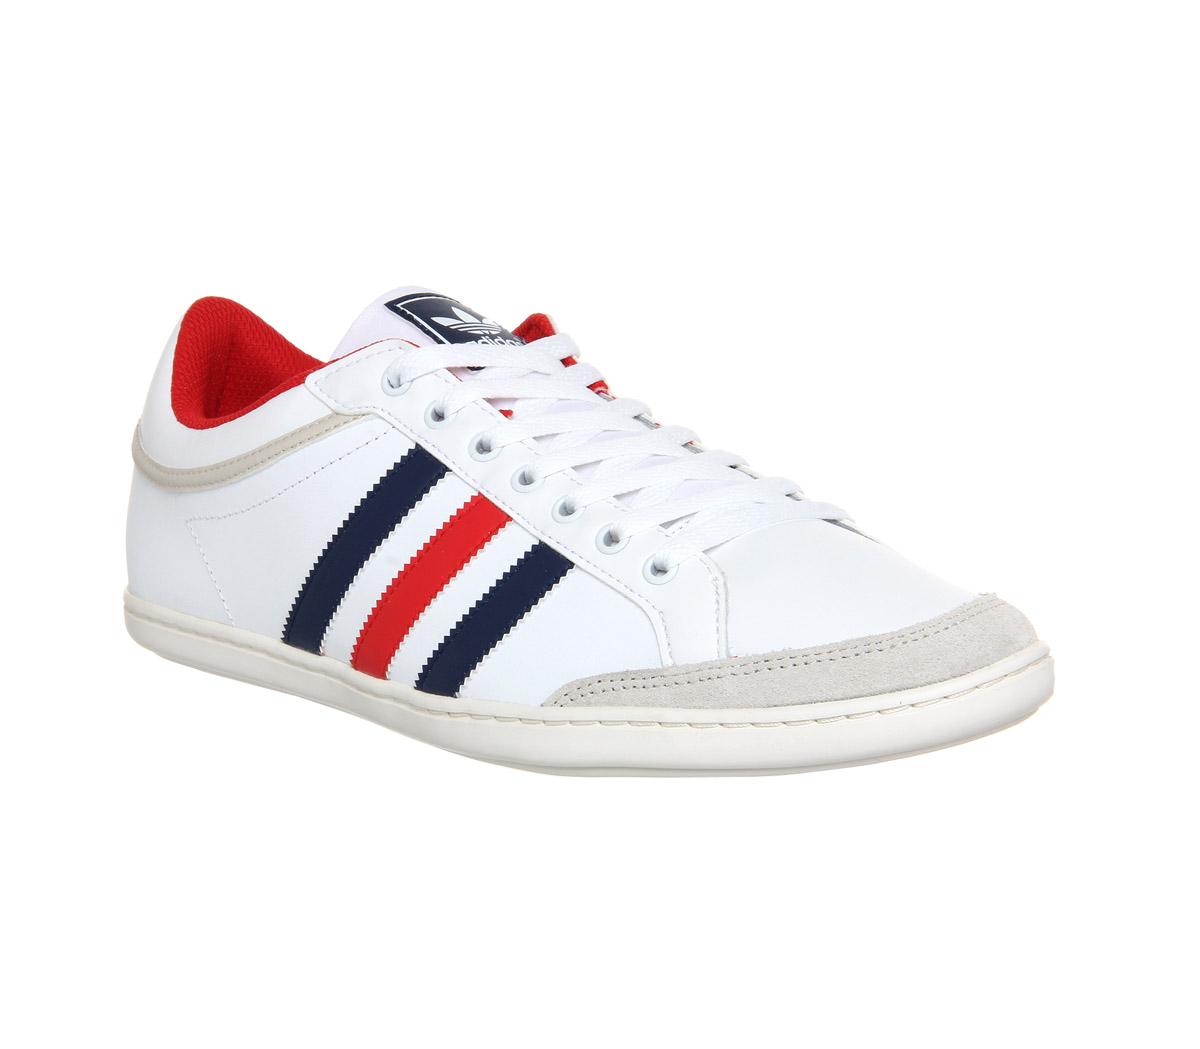 Adidas Low White Discount, SAVE - aveclumiere.com